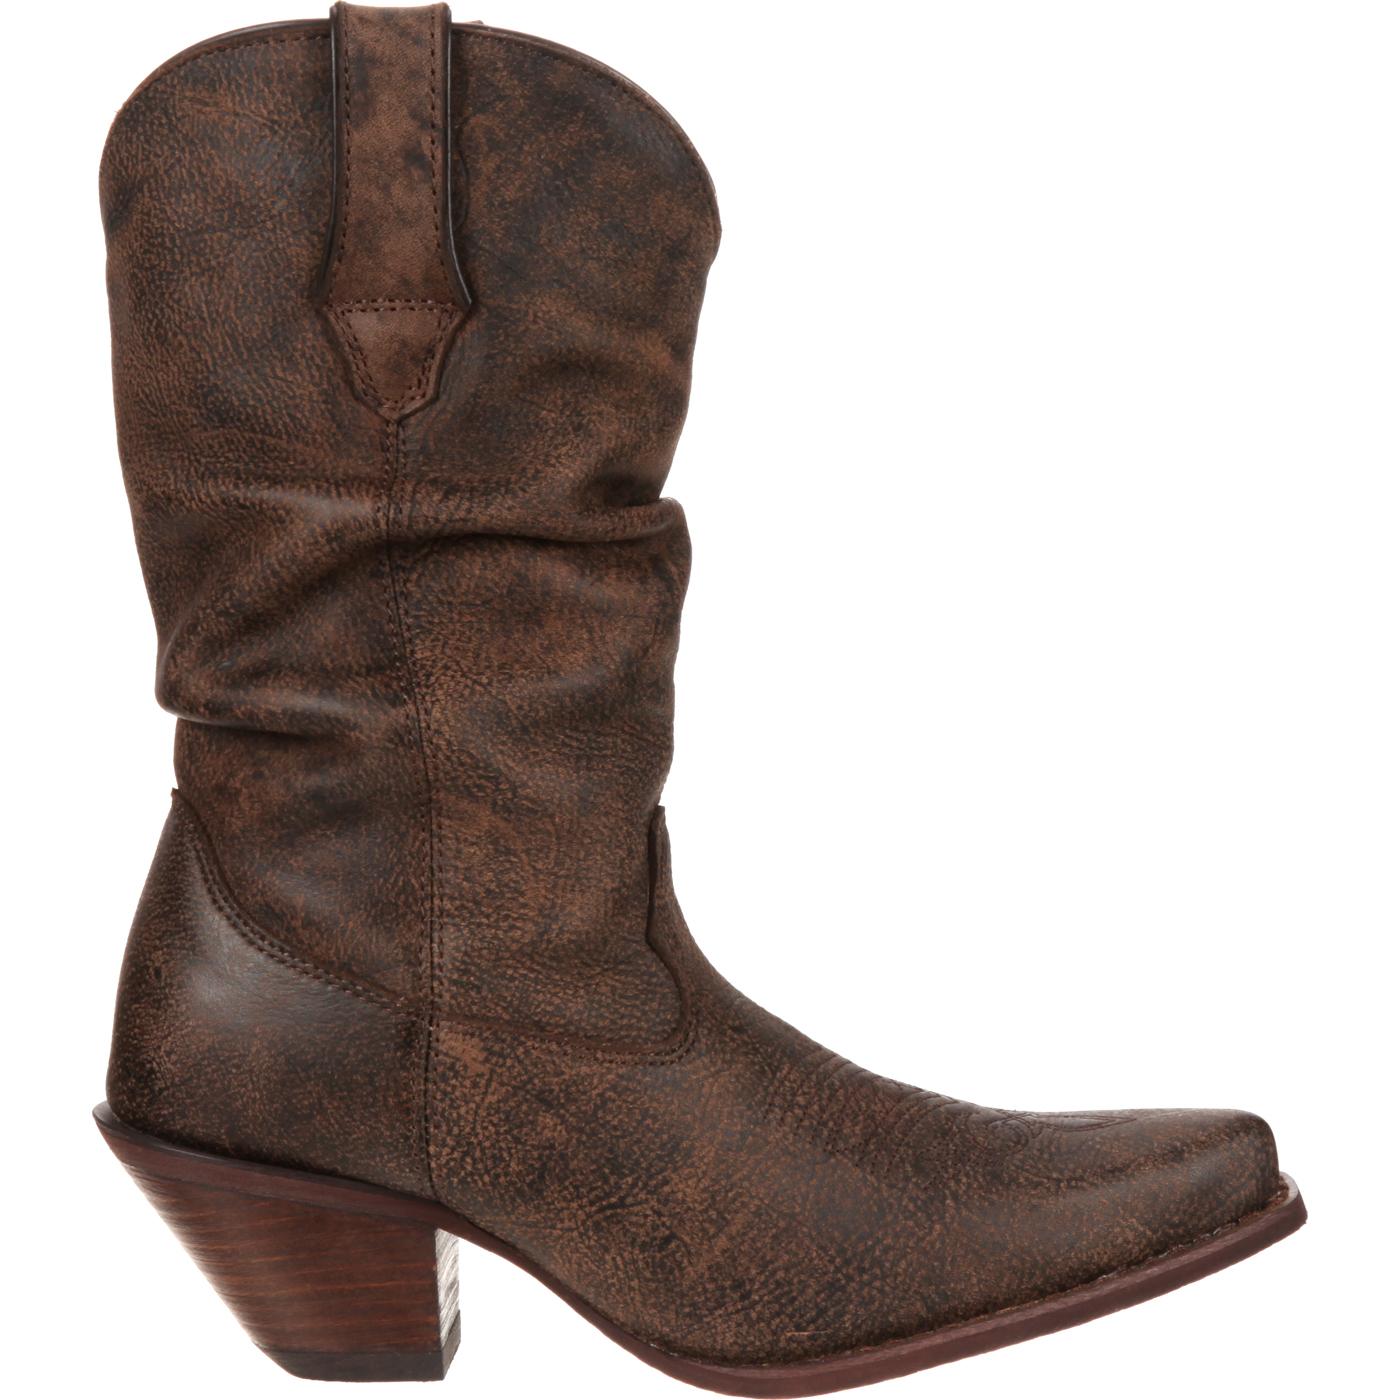 Crush by Durango: Women's Brown Leather Slouch Western Boot